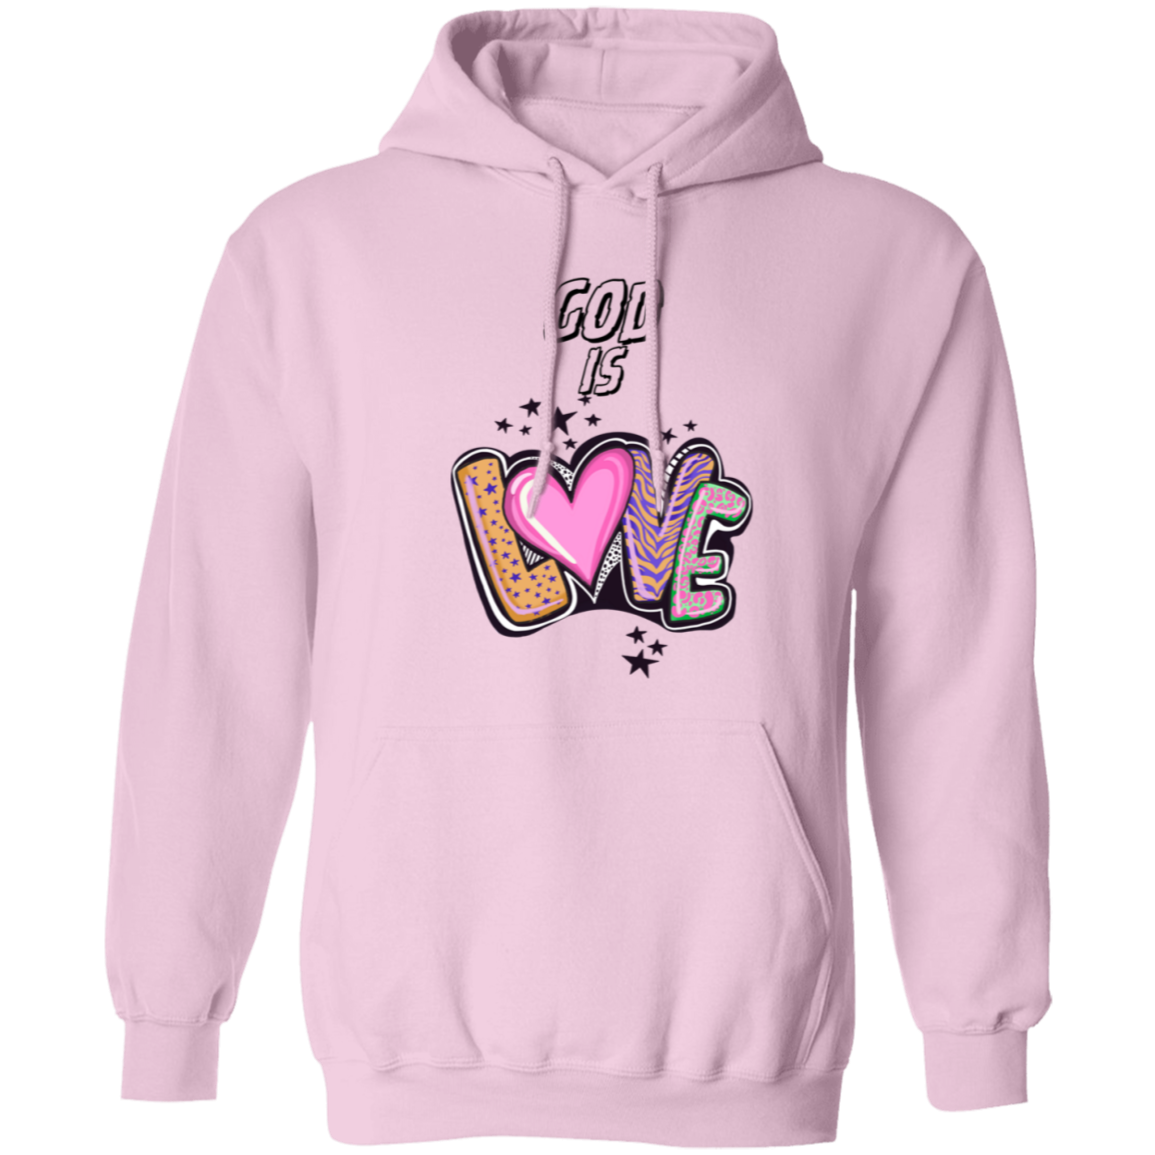 God is Love Pullover Hoodie 8 oz (Closeout)